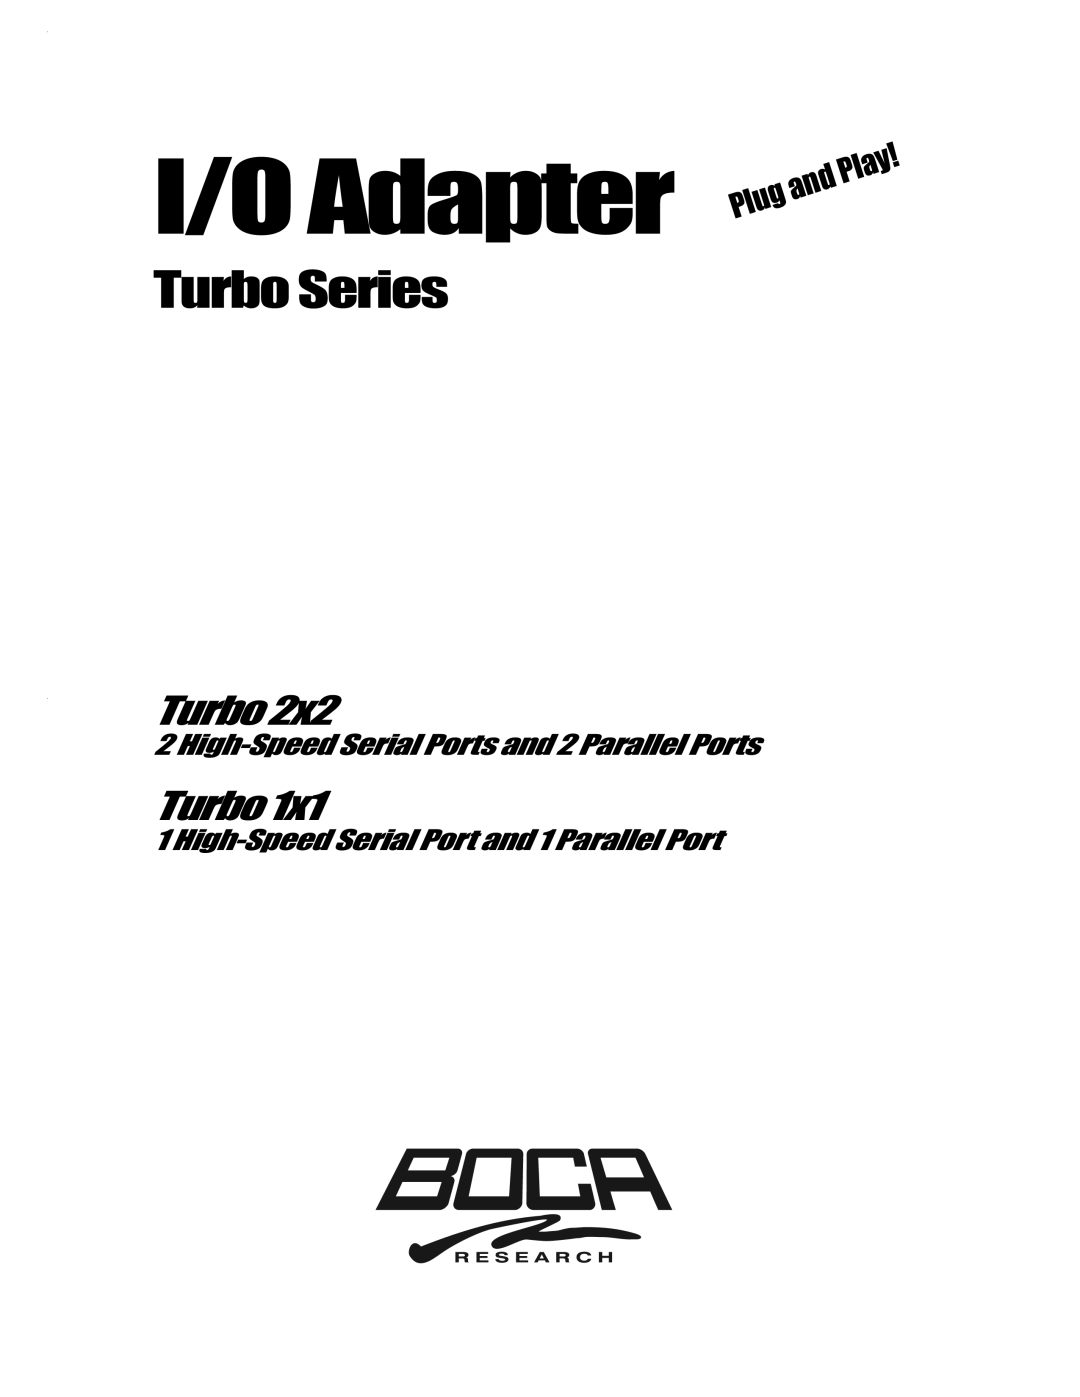 Boca Research 2x2, Turbo1x1 manual I/O Adapter, Turbo Series, High-Speed Serial Ports and 2 Parallel Ports 